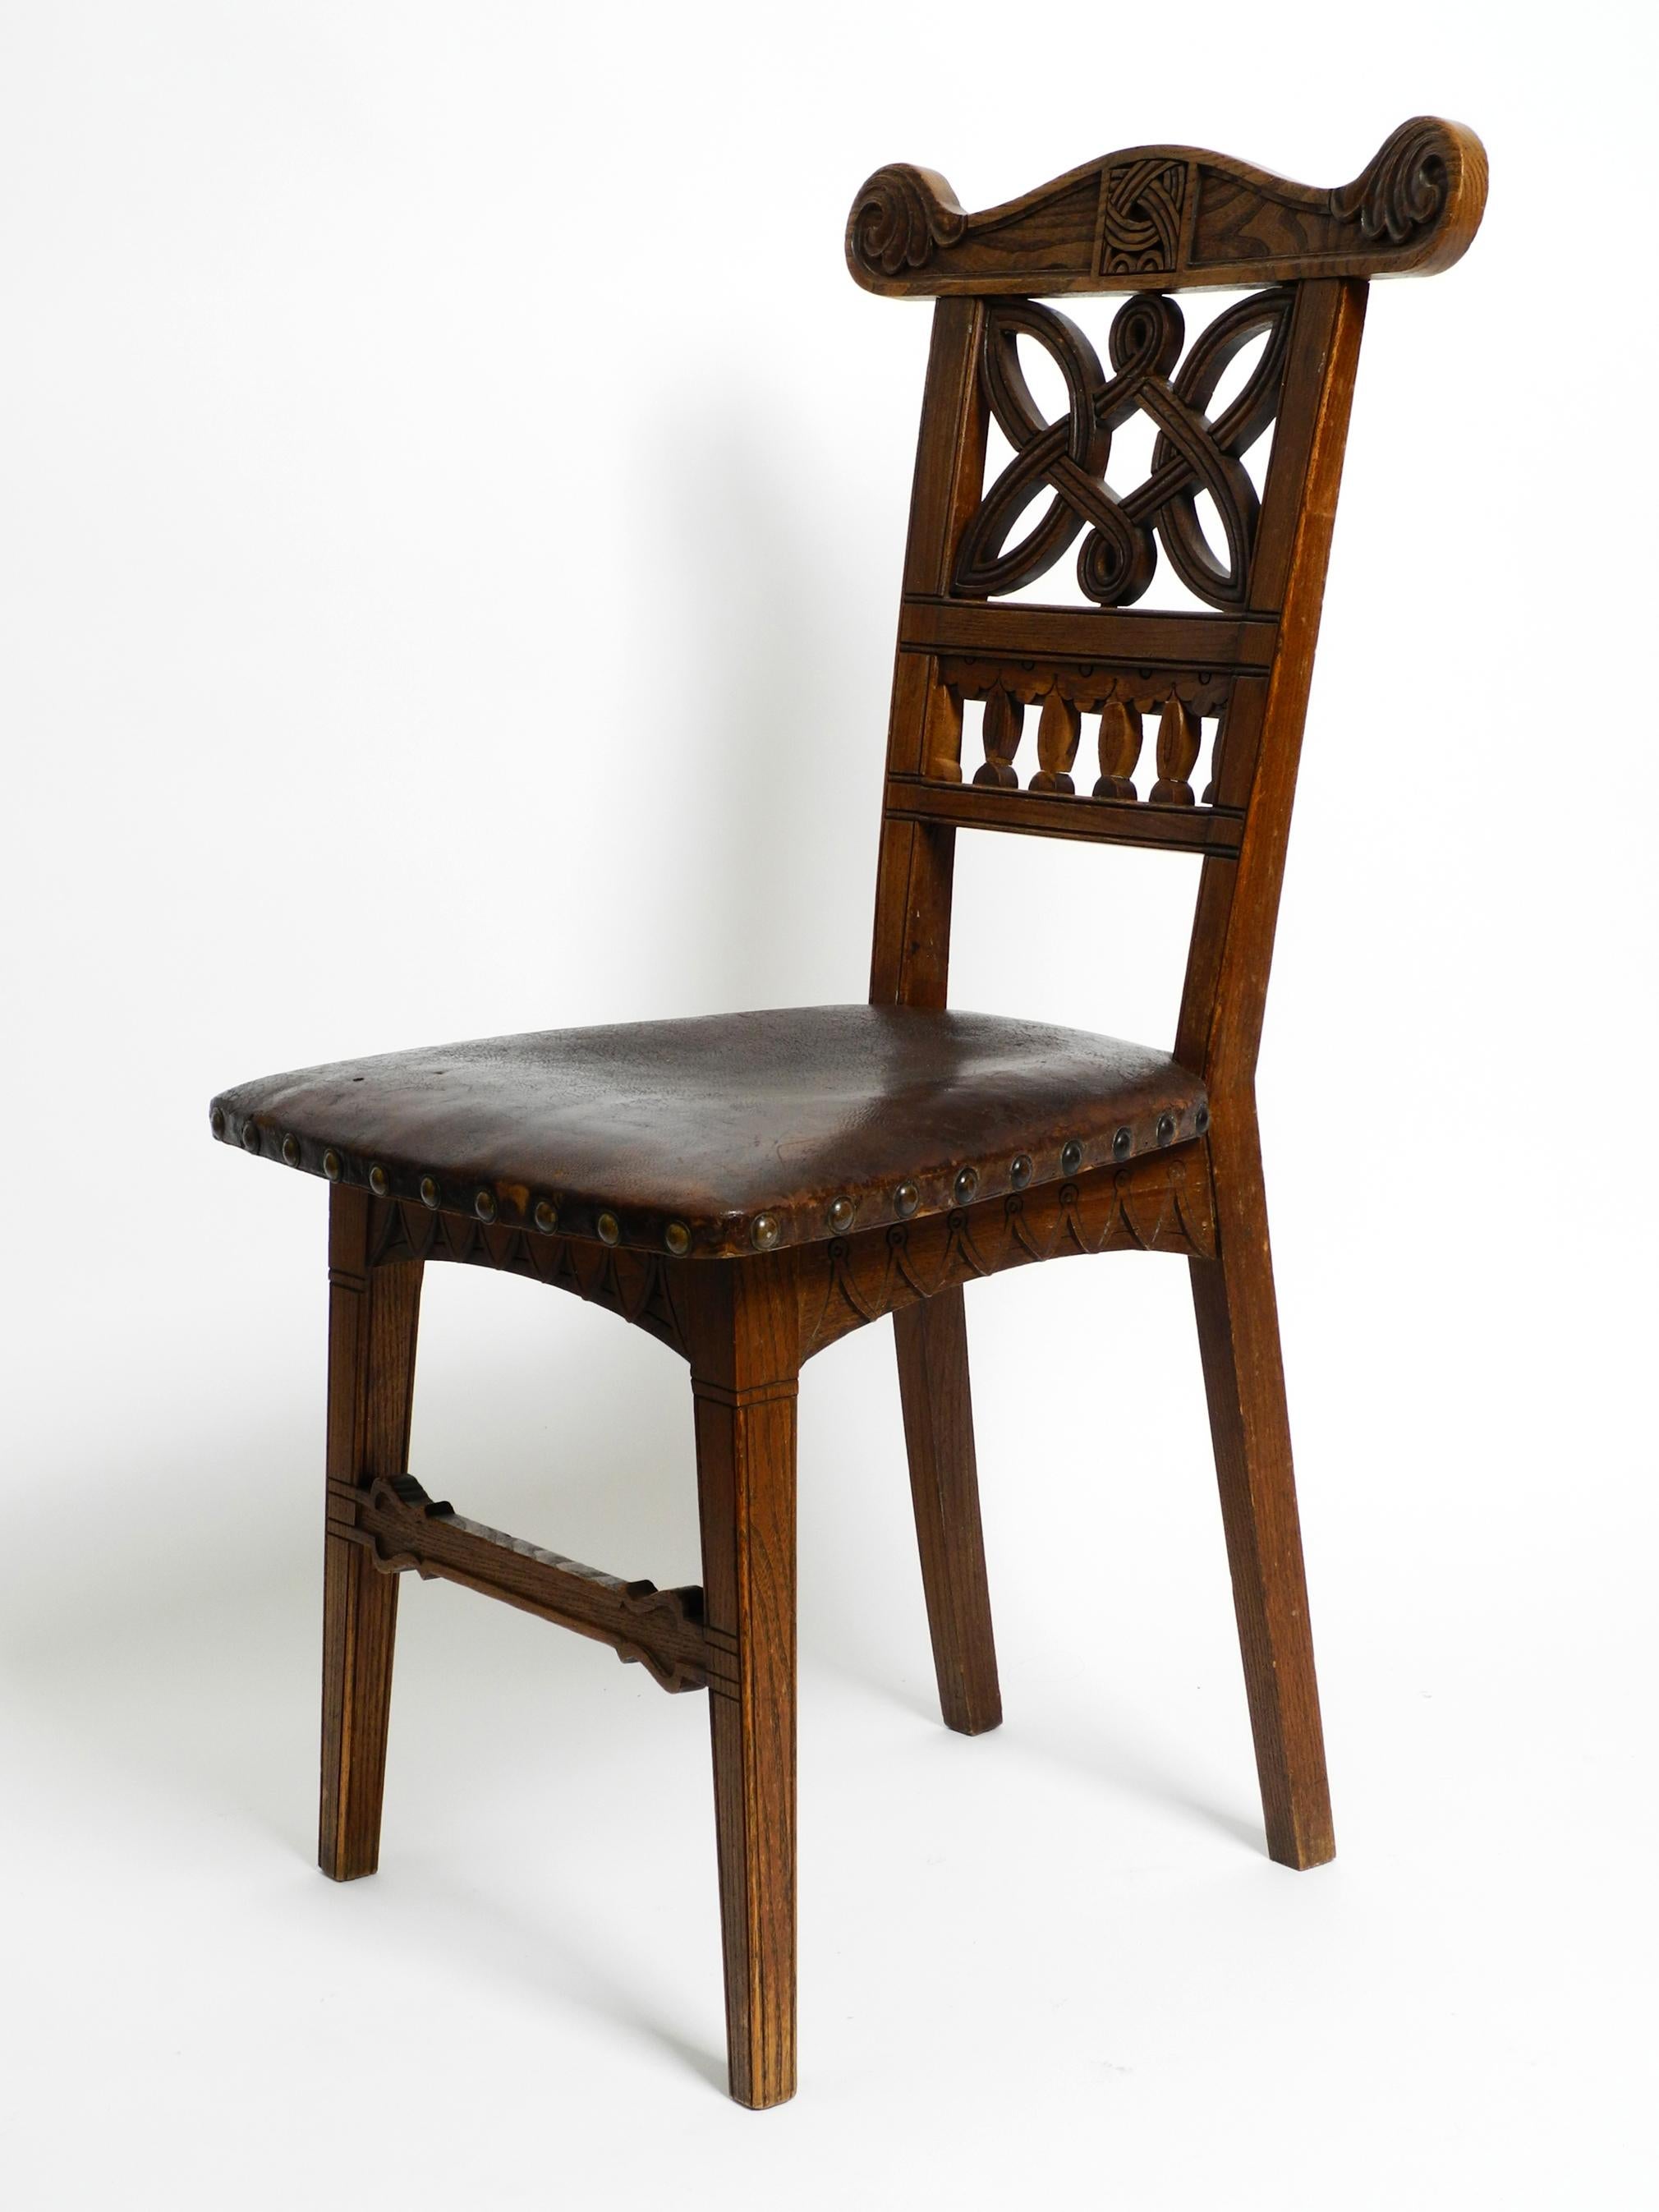 2 Art Nouveau Oak Chairs Still with the Original Leather Seats from Around 1900 For Sale 11